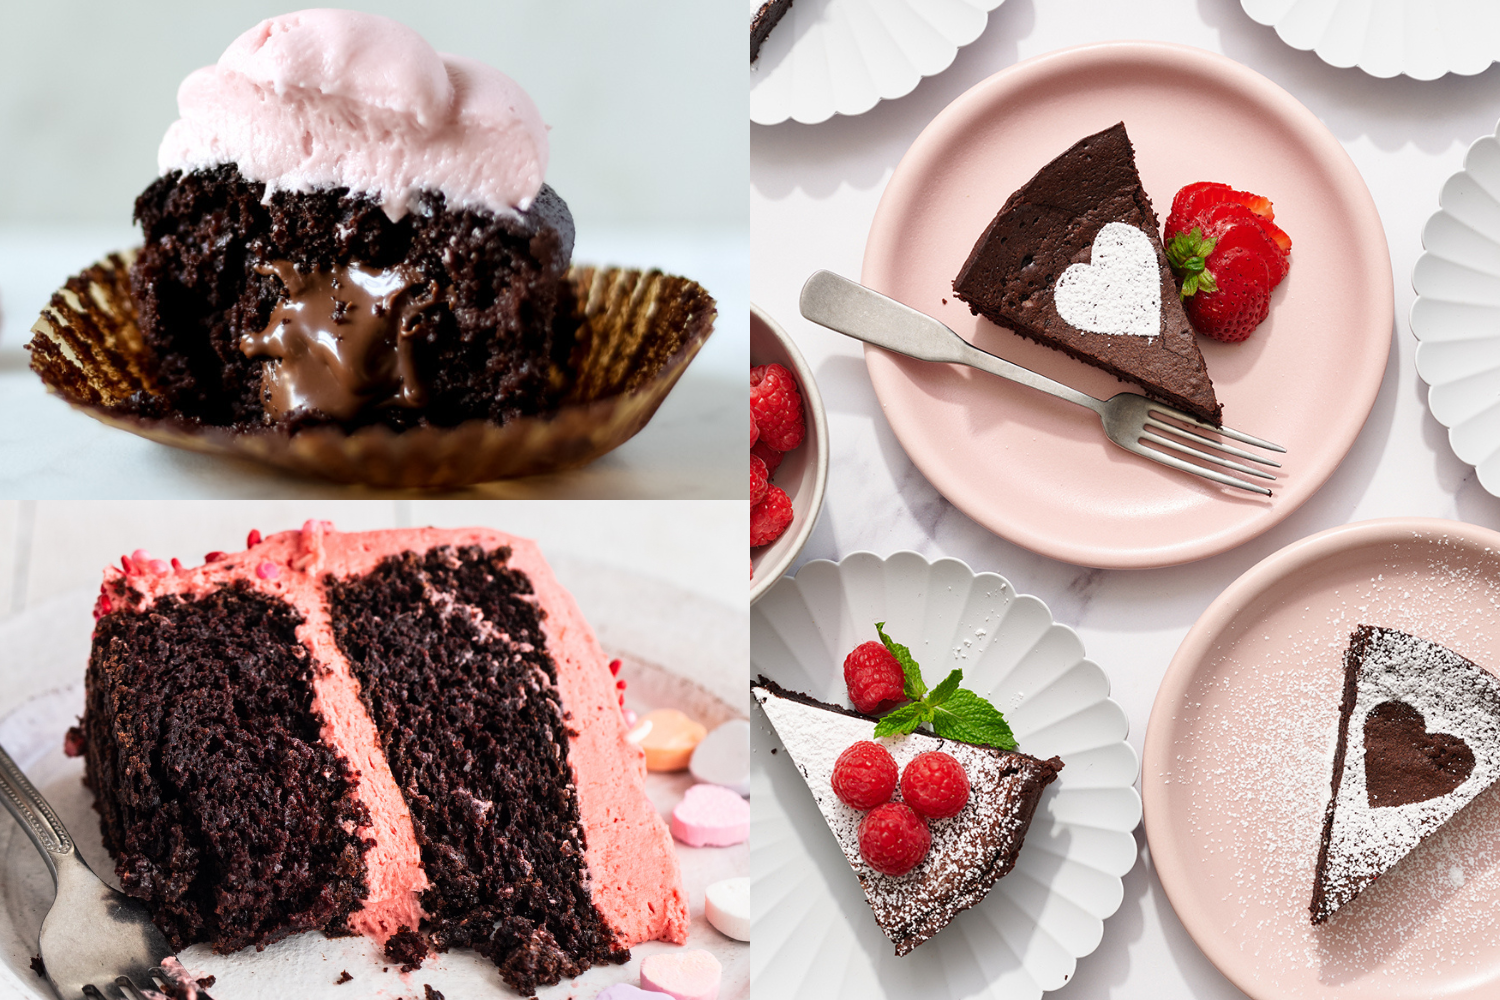 three images: one Nutella-stuffed chocolate cupcake topped with raspberry frosting, above a chocolate layer cake iced in strawberry frosting, next to a few plates of slices of flourless chocolate topped with fresh berries.